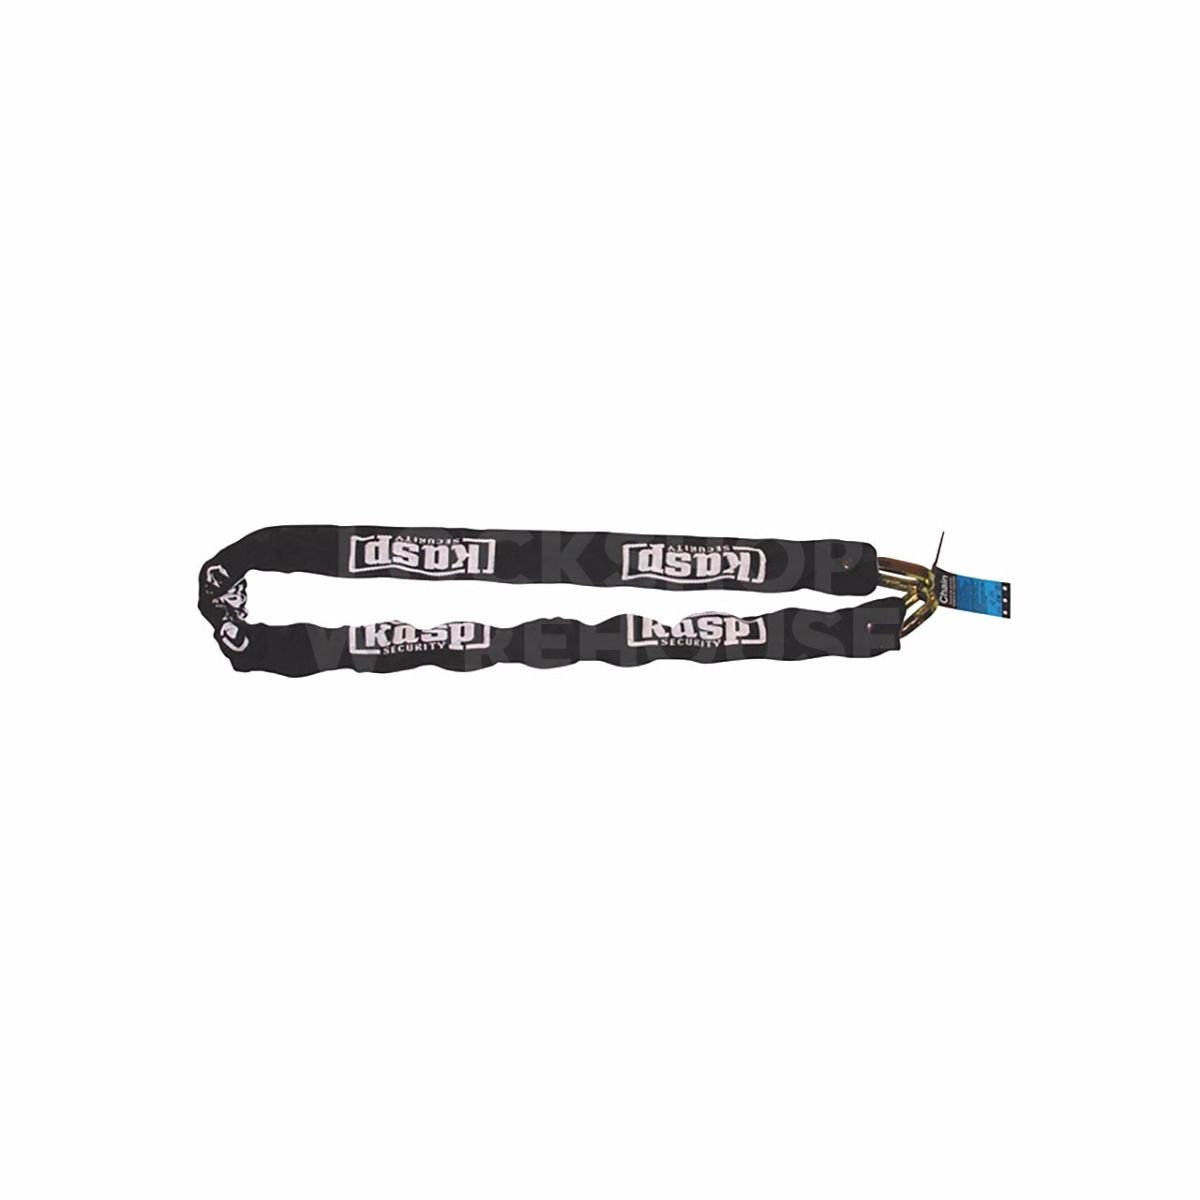 Kasp Security Chain 10mm